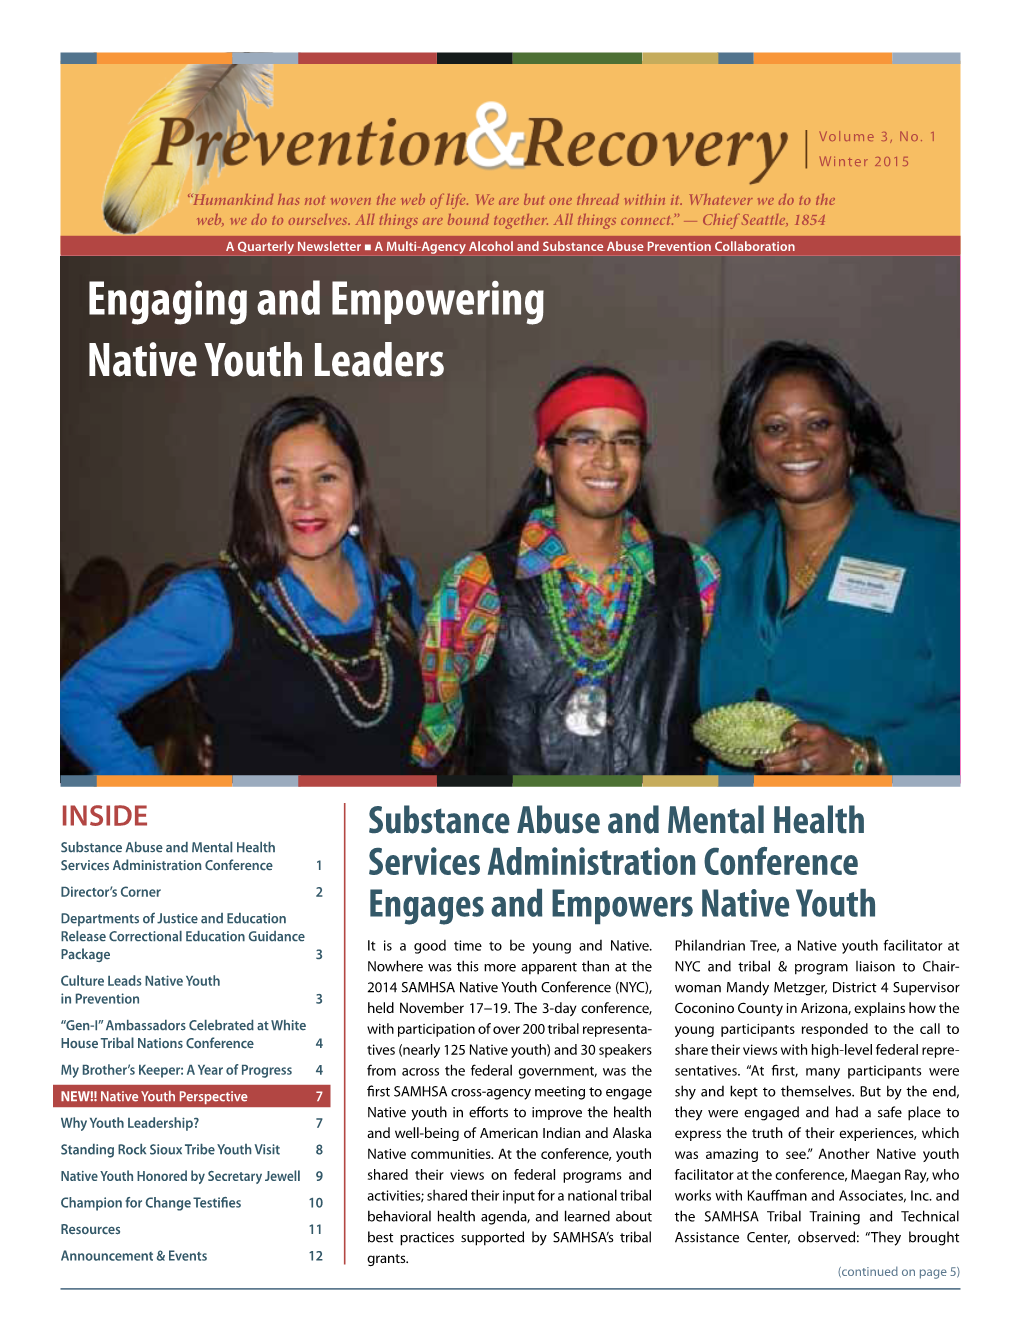 Engaging and Empowering Native Youth Leaders